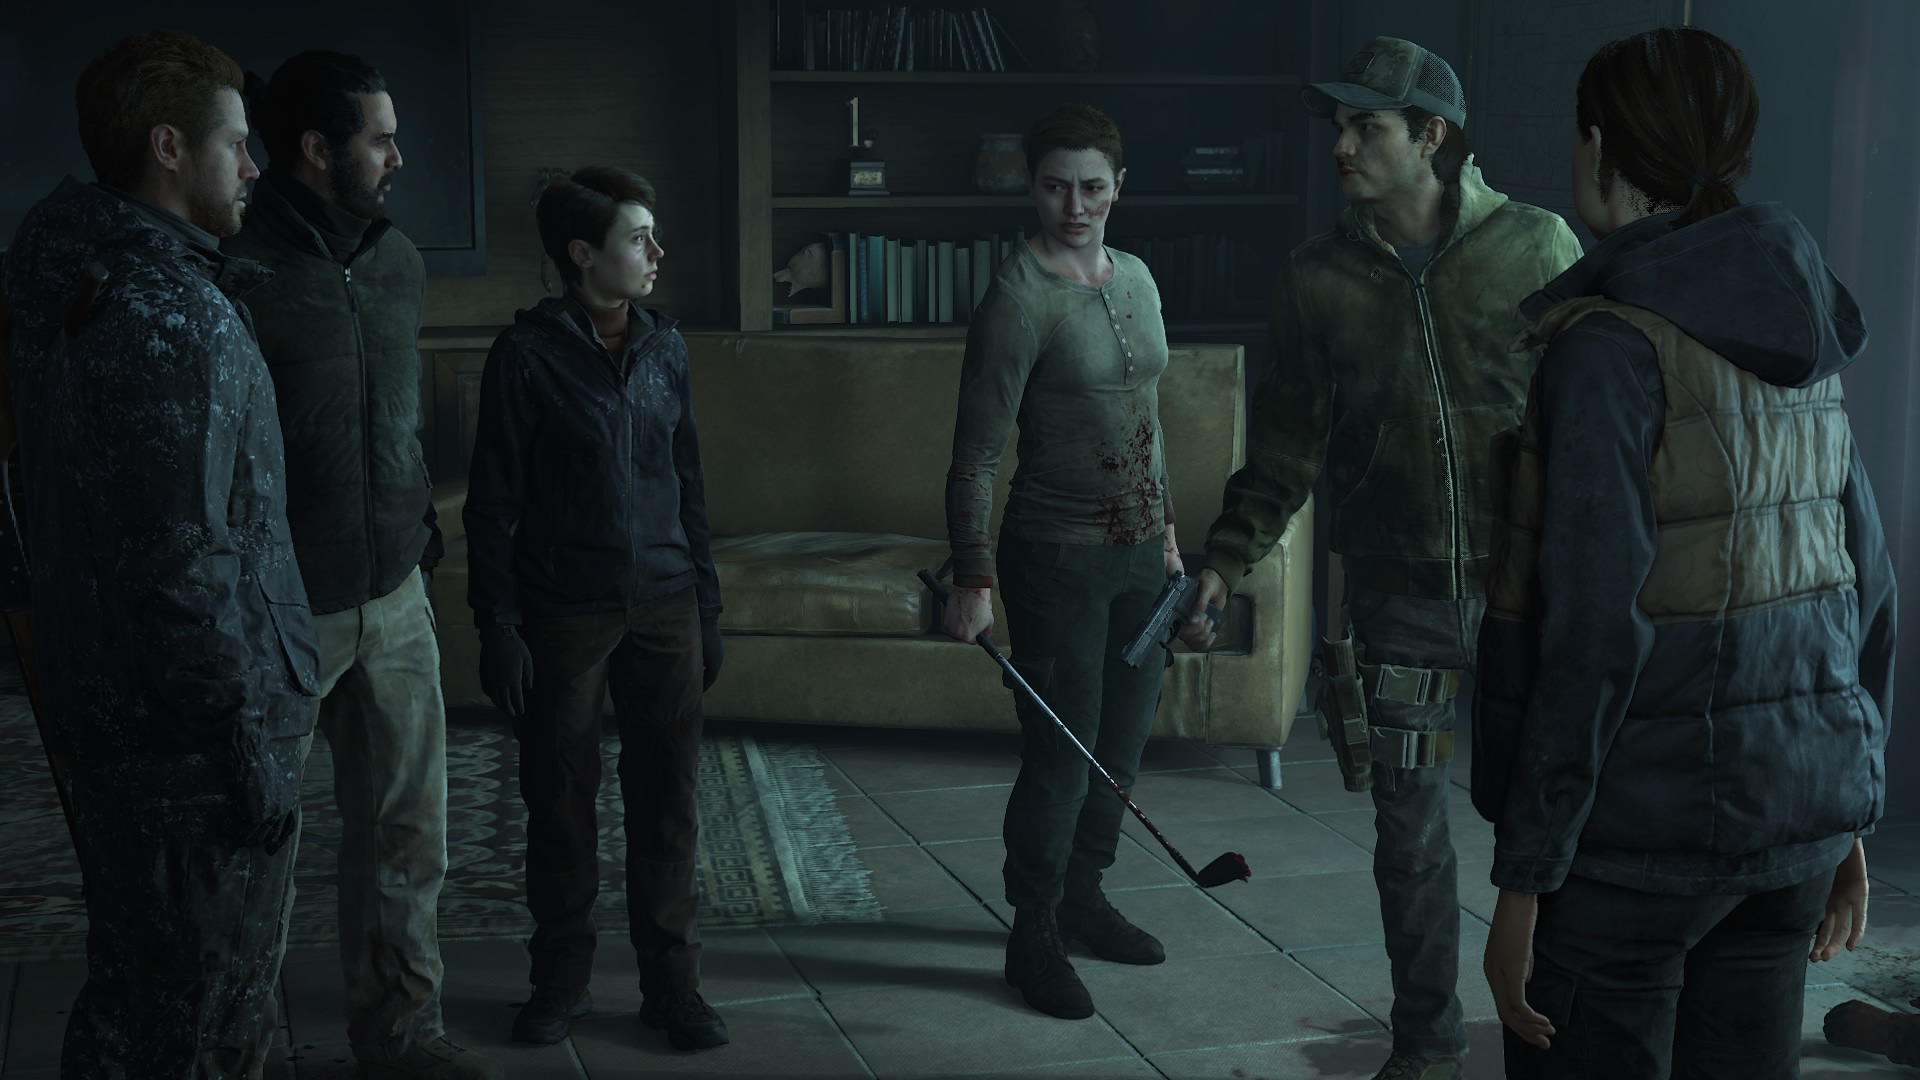 The Last of Us 2' rumors: Joel killed by Fireflies, only a vision